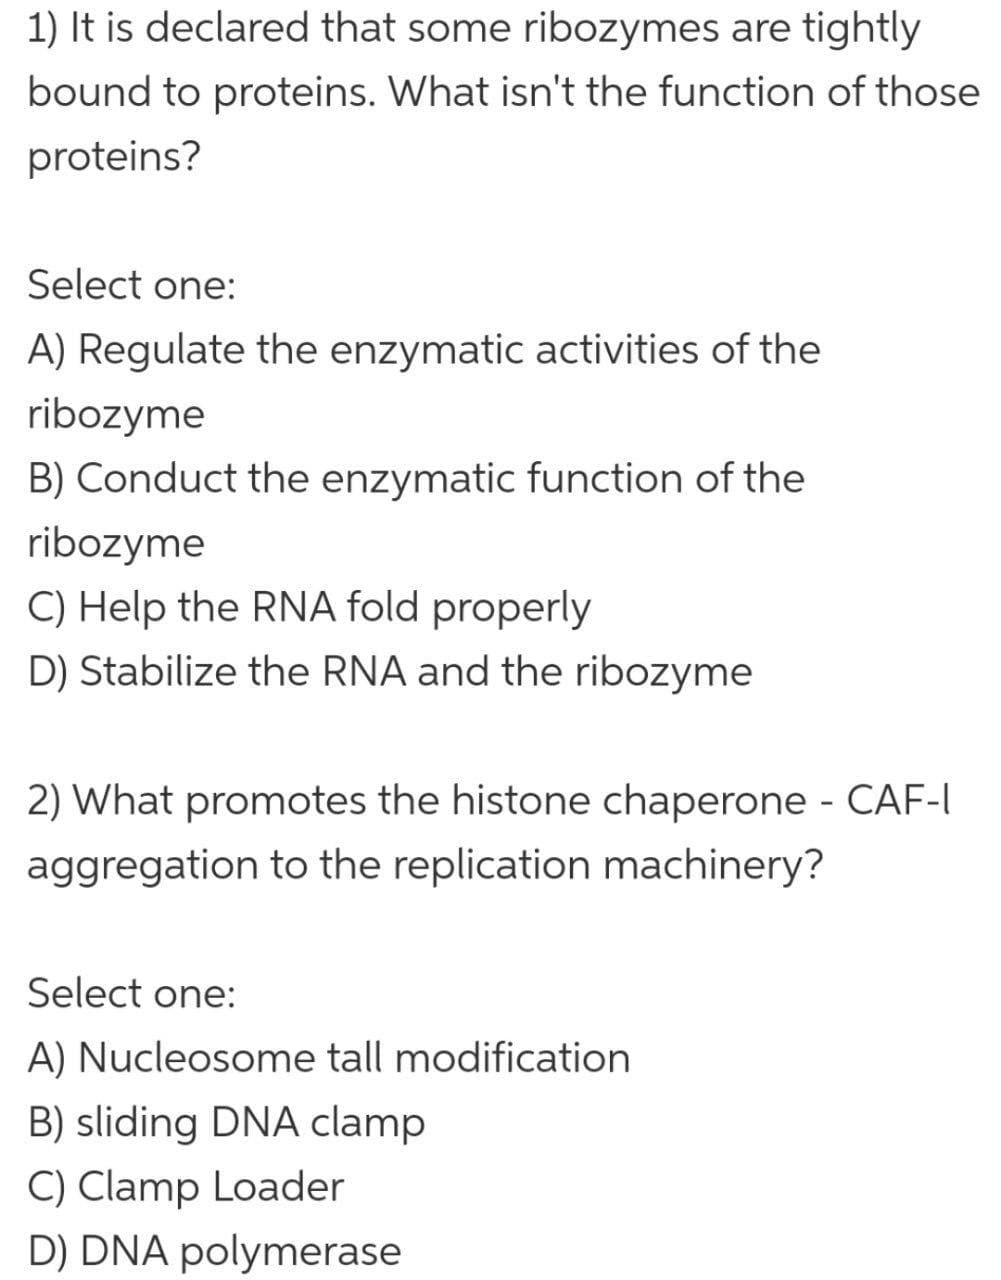 1) It is declared that some ribozymes are tightly
bound to proteins. What isn't the function of those
proteins?
Select one:
A) Regulate the enzymatic activities of the
ribozyme
B) Conduct the enzymatic function of the
ribozyme
C) Help the RNA fold properly
D) Stabilize the RNA and the ribozyme
2) What promotes the histone chaperone - CAF-I
aggregation to the replication machinery?
Select one:
A) Nucleosome tall modification
B) sliding DNA clamp
C) Clamp Loader
D) DNA polymerase
